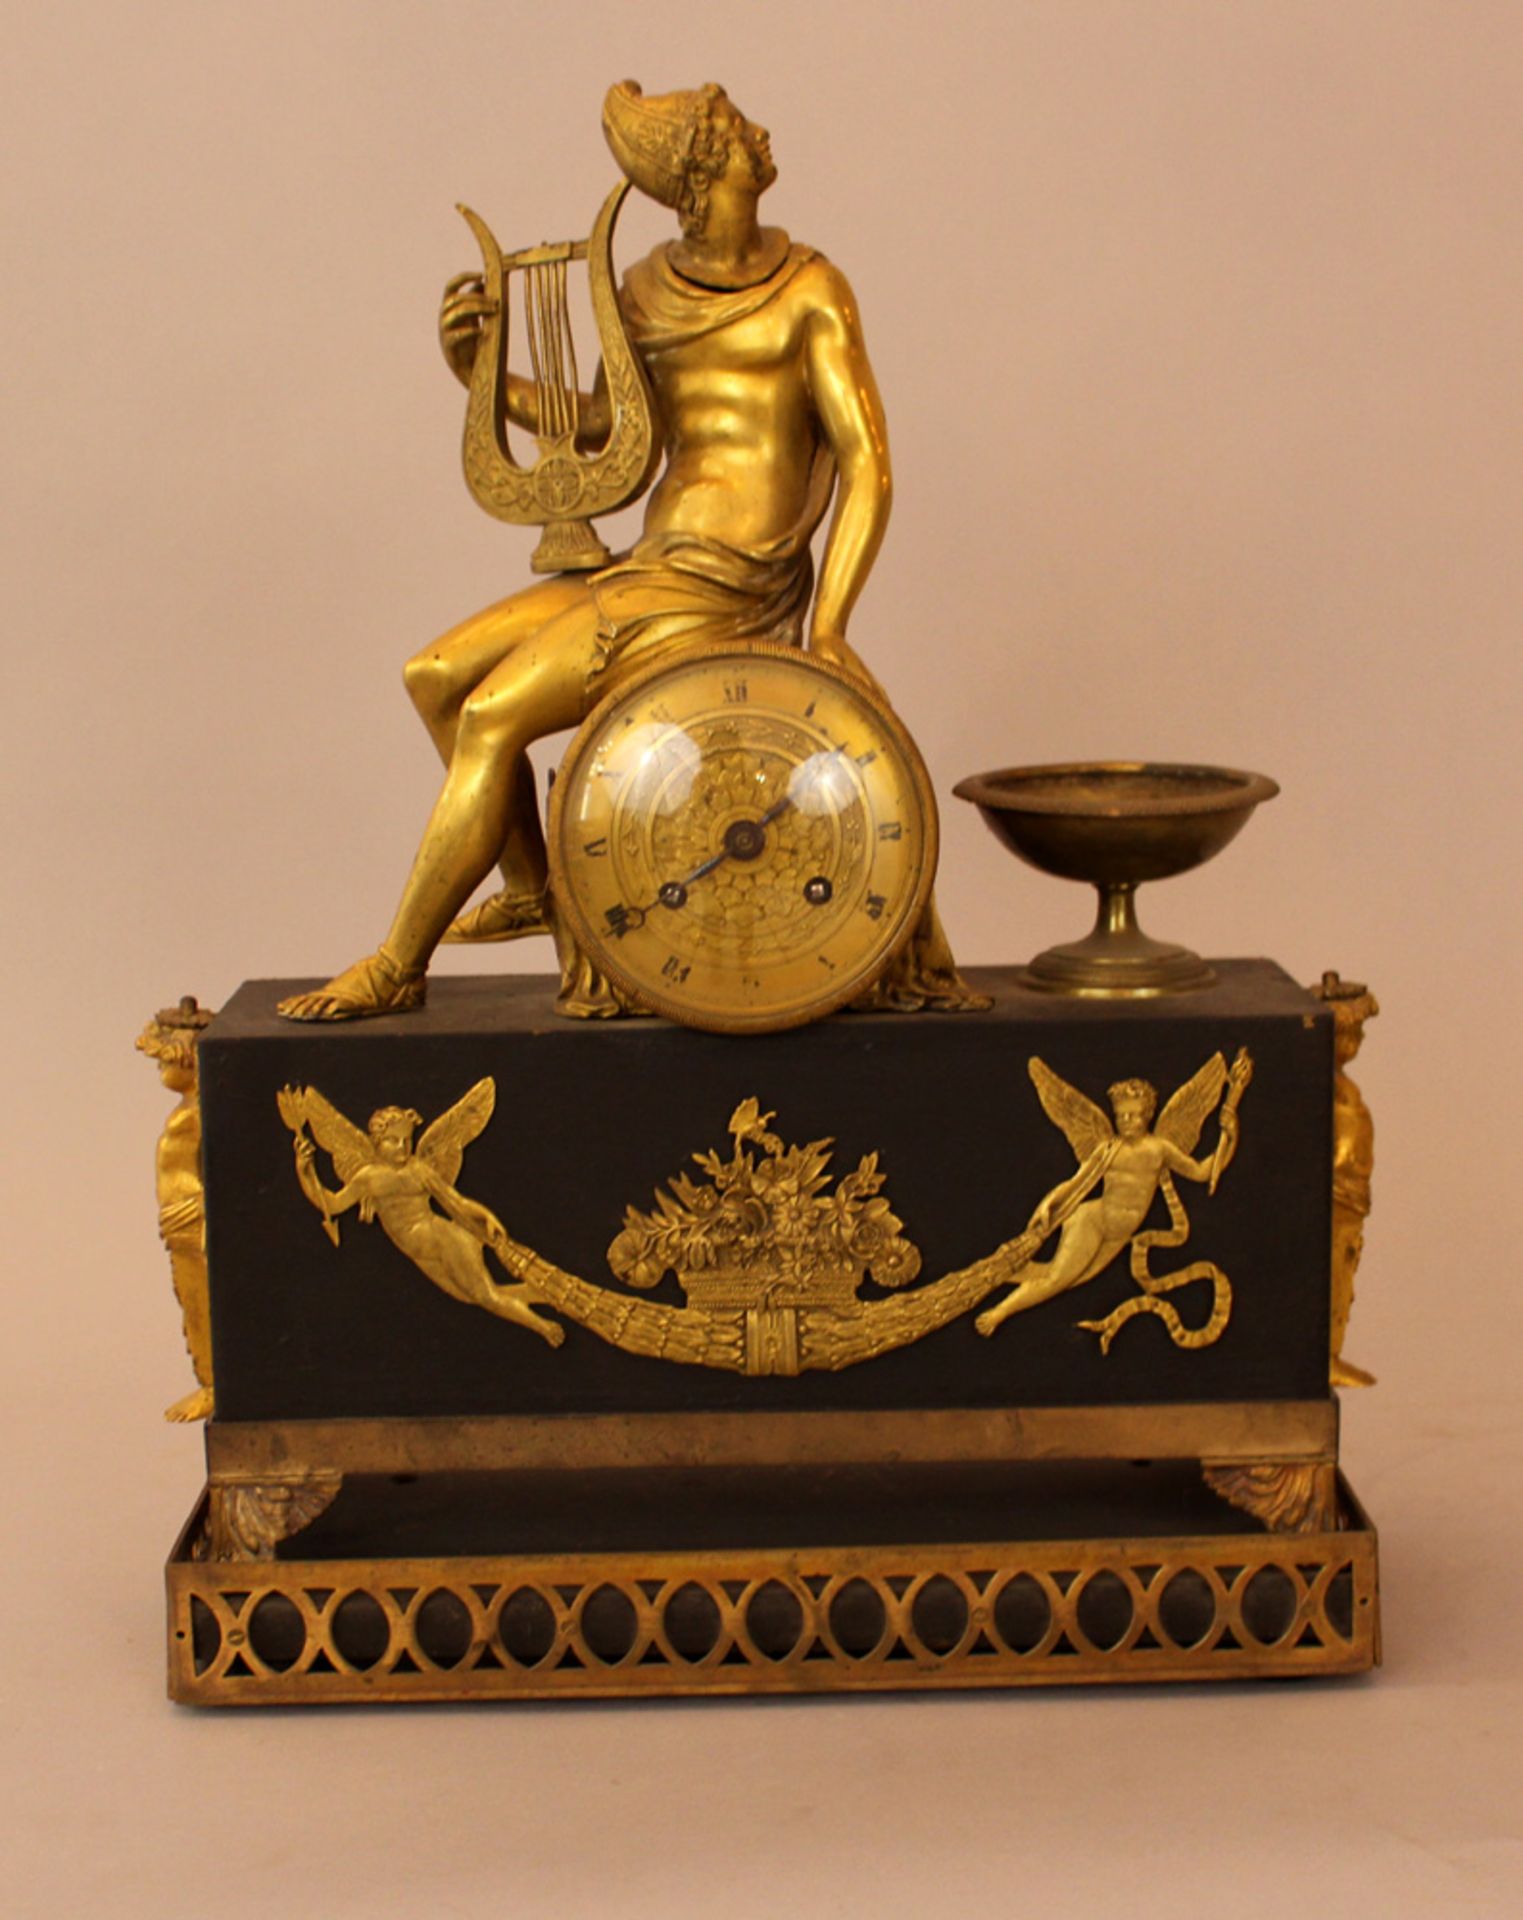 Empire clock with Hermes and the lyra on top, bronze mantel partly gilded and ebonised with round